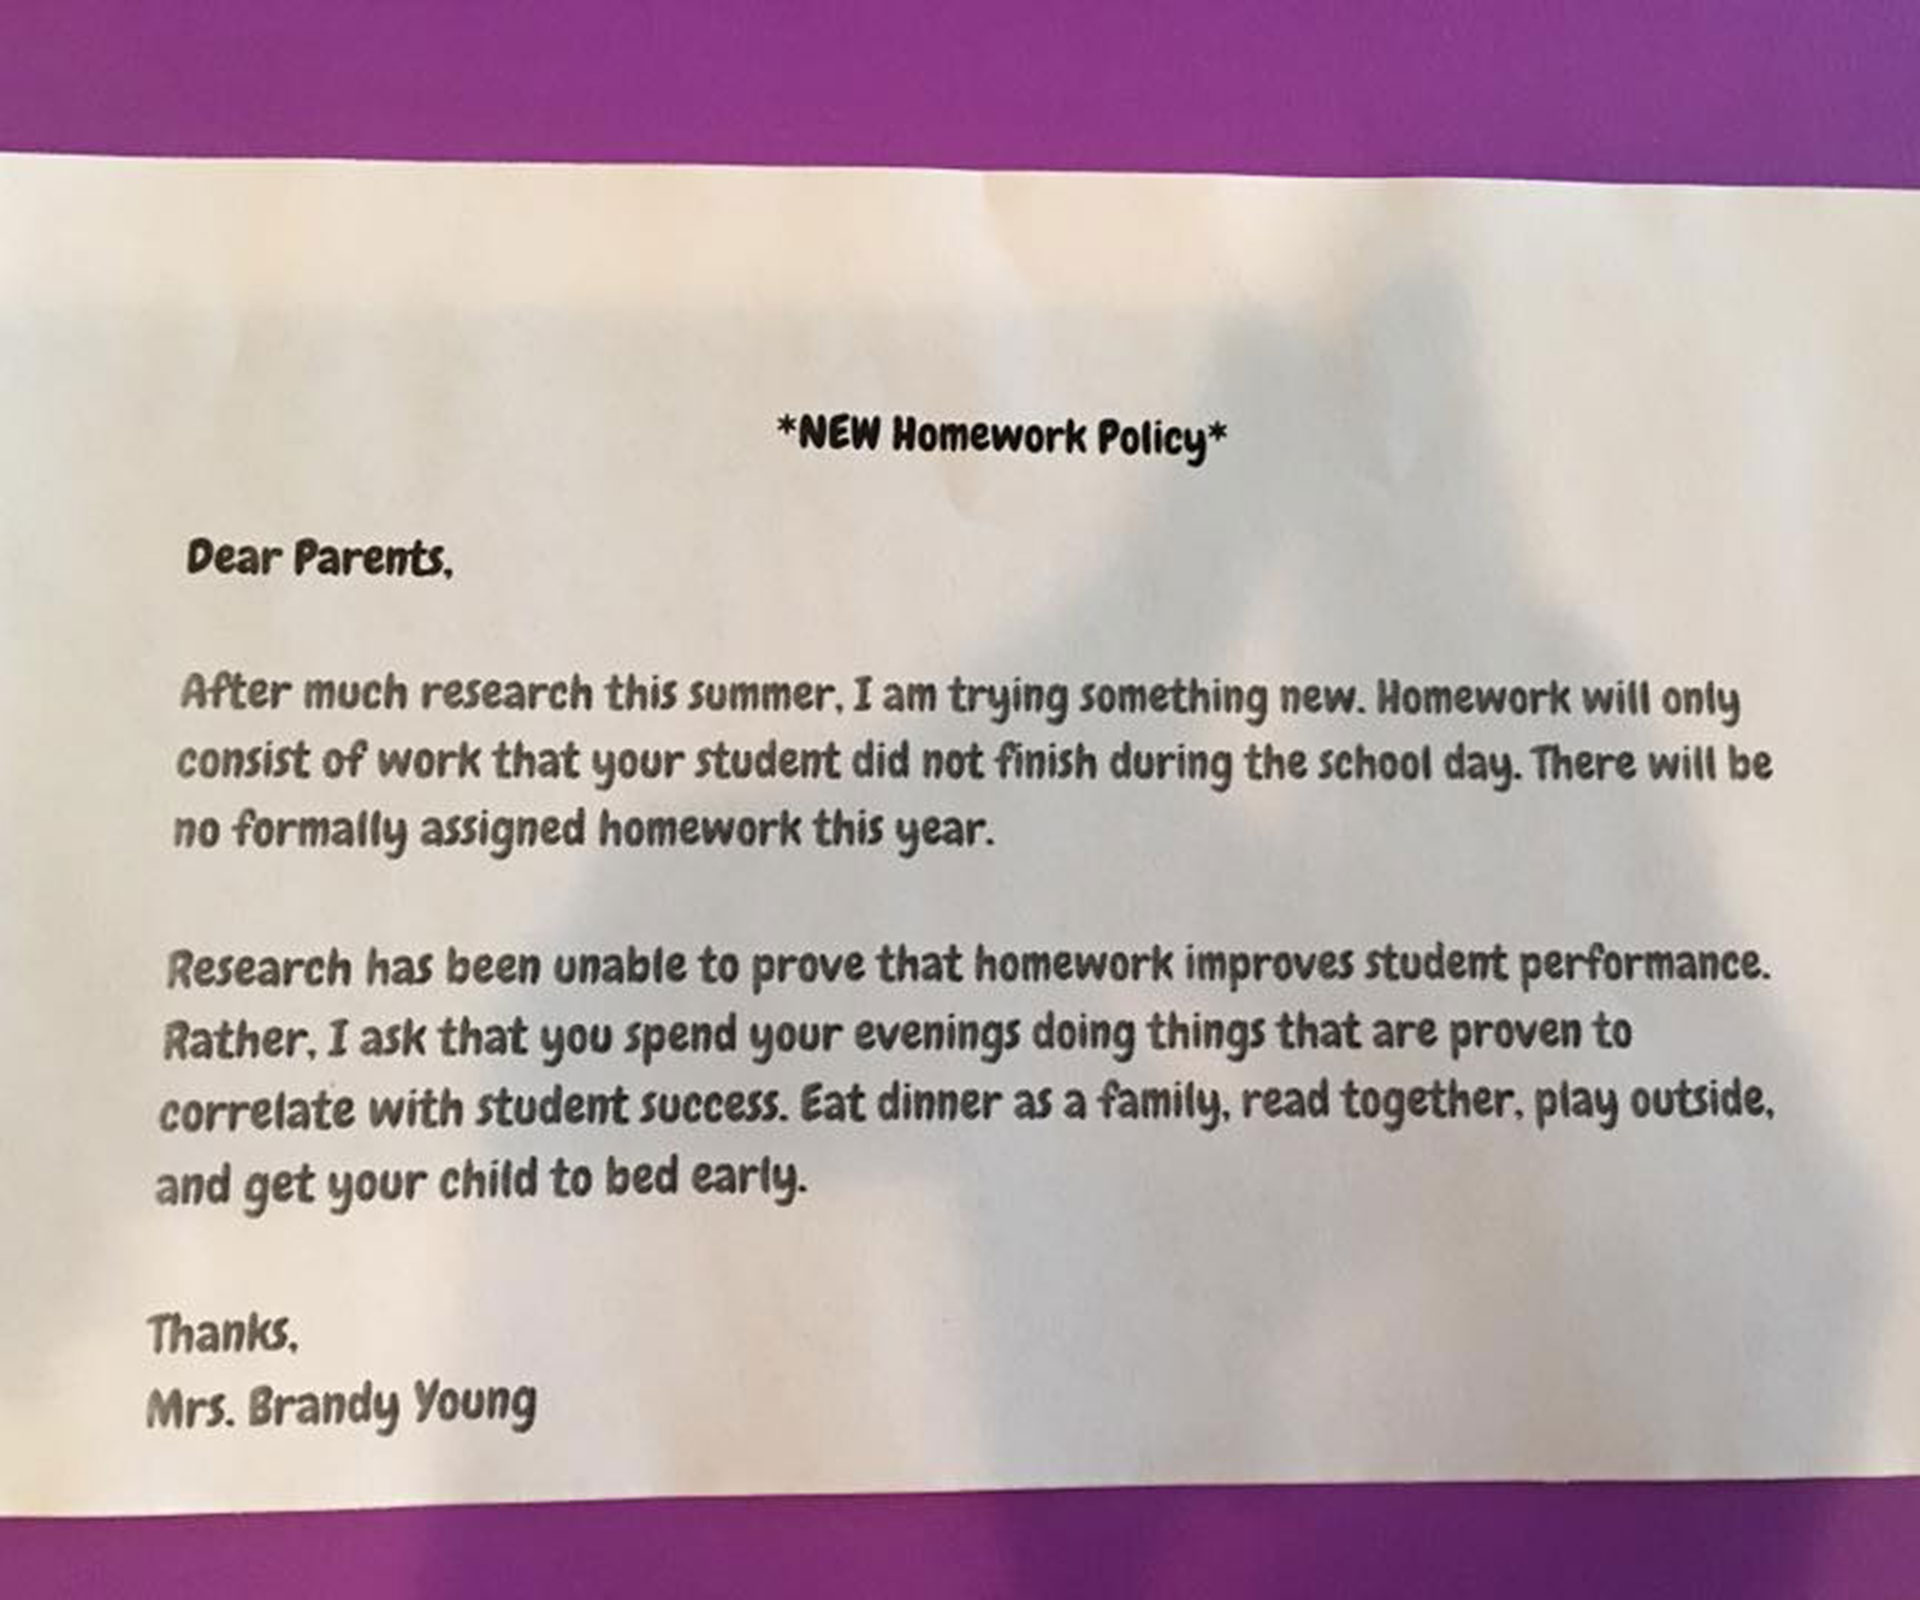 The homework policy going viral